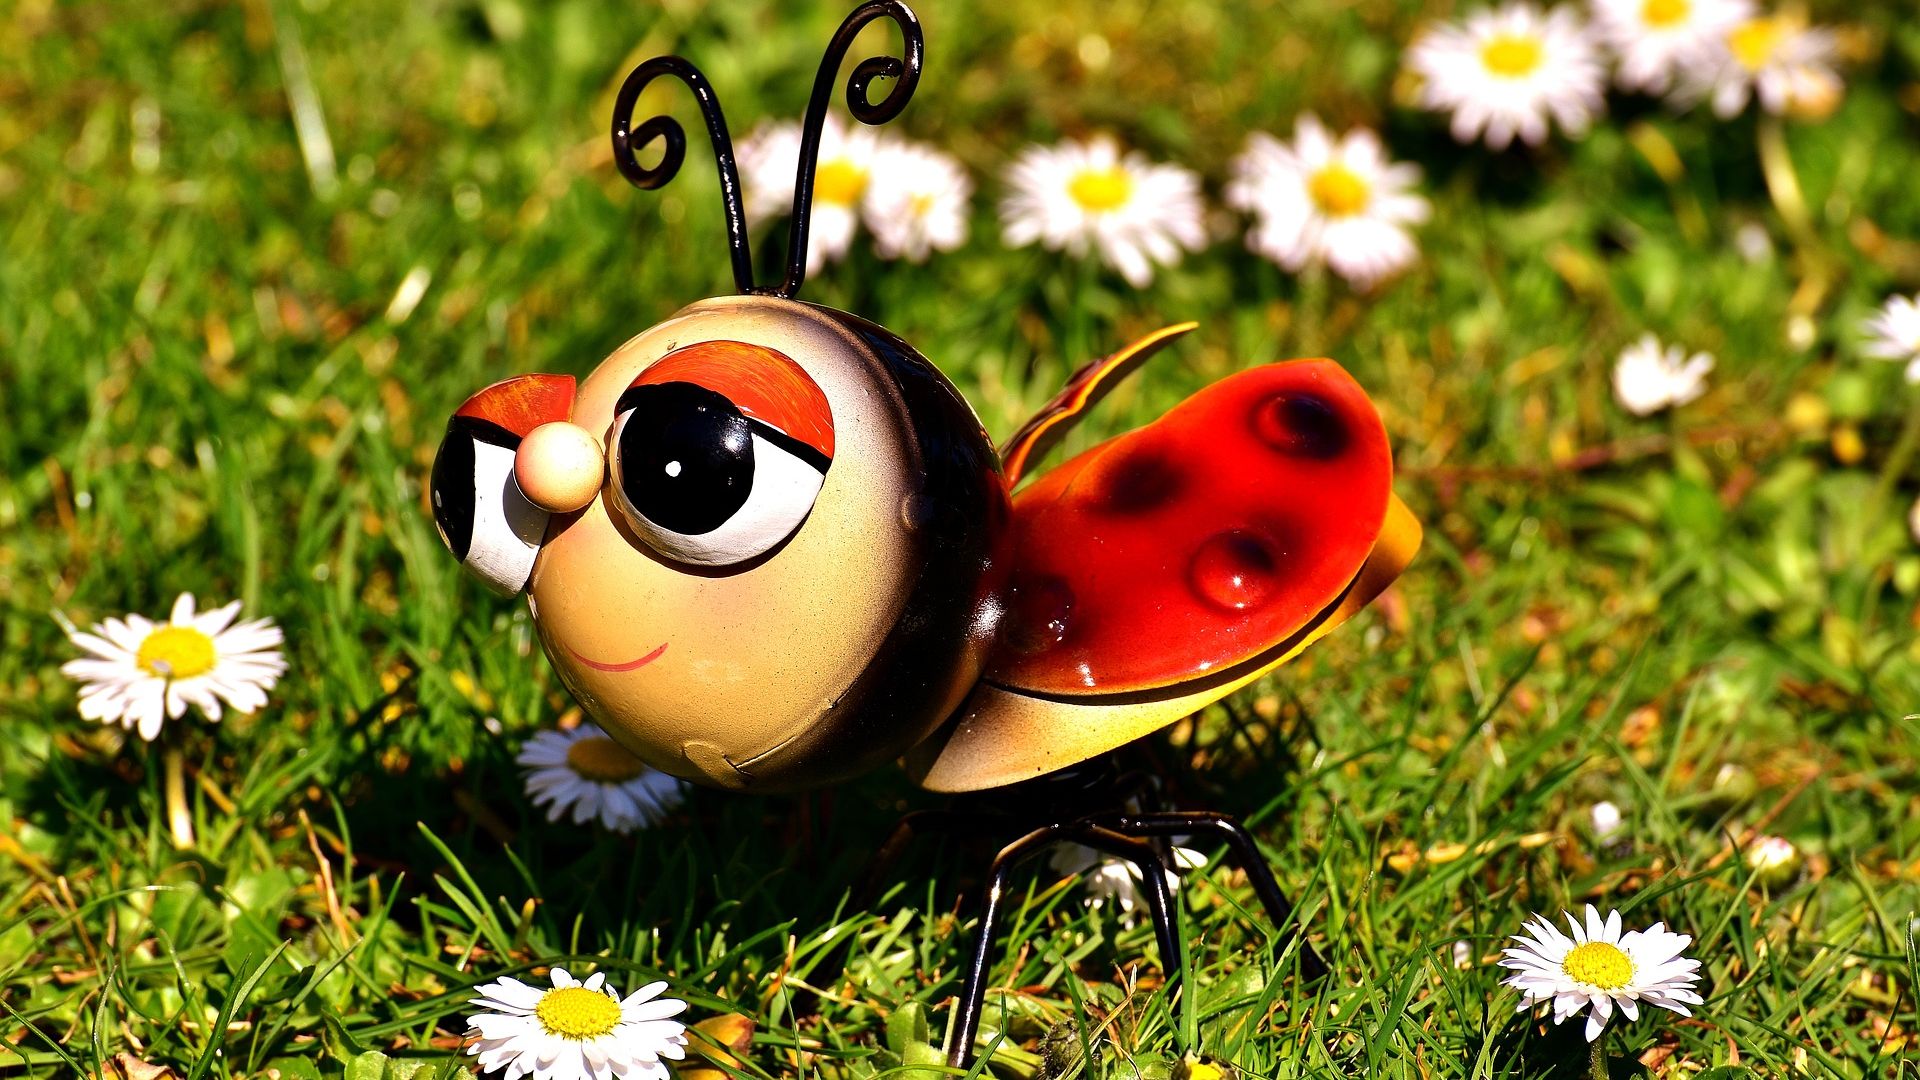 Wallpaper Ladybug, insect toy, grass, wild flowers